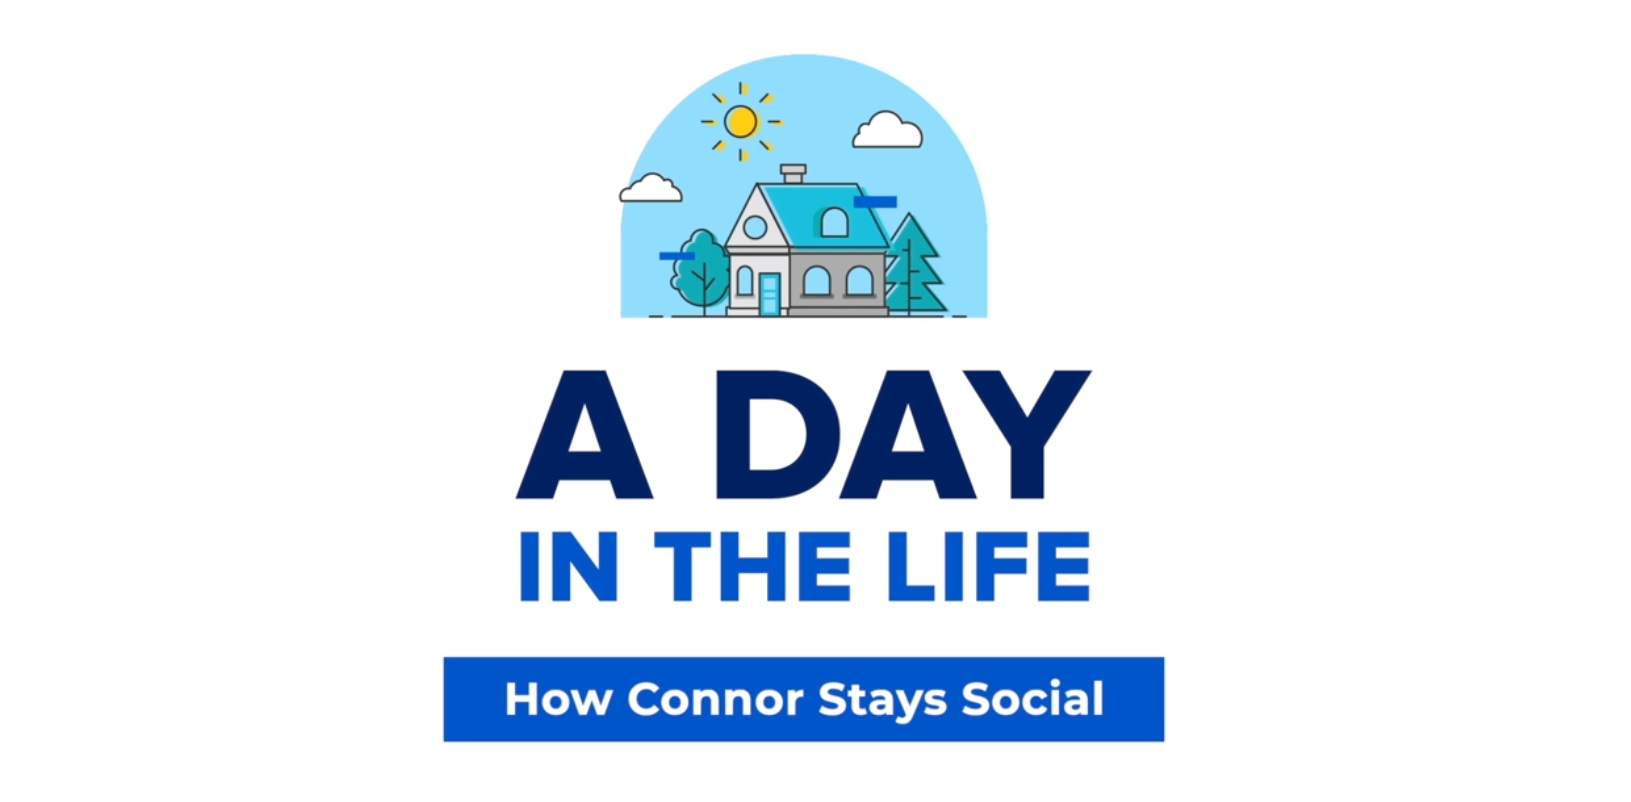 K12 how connor stays social image